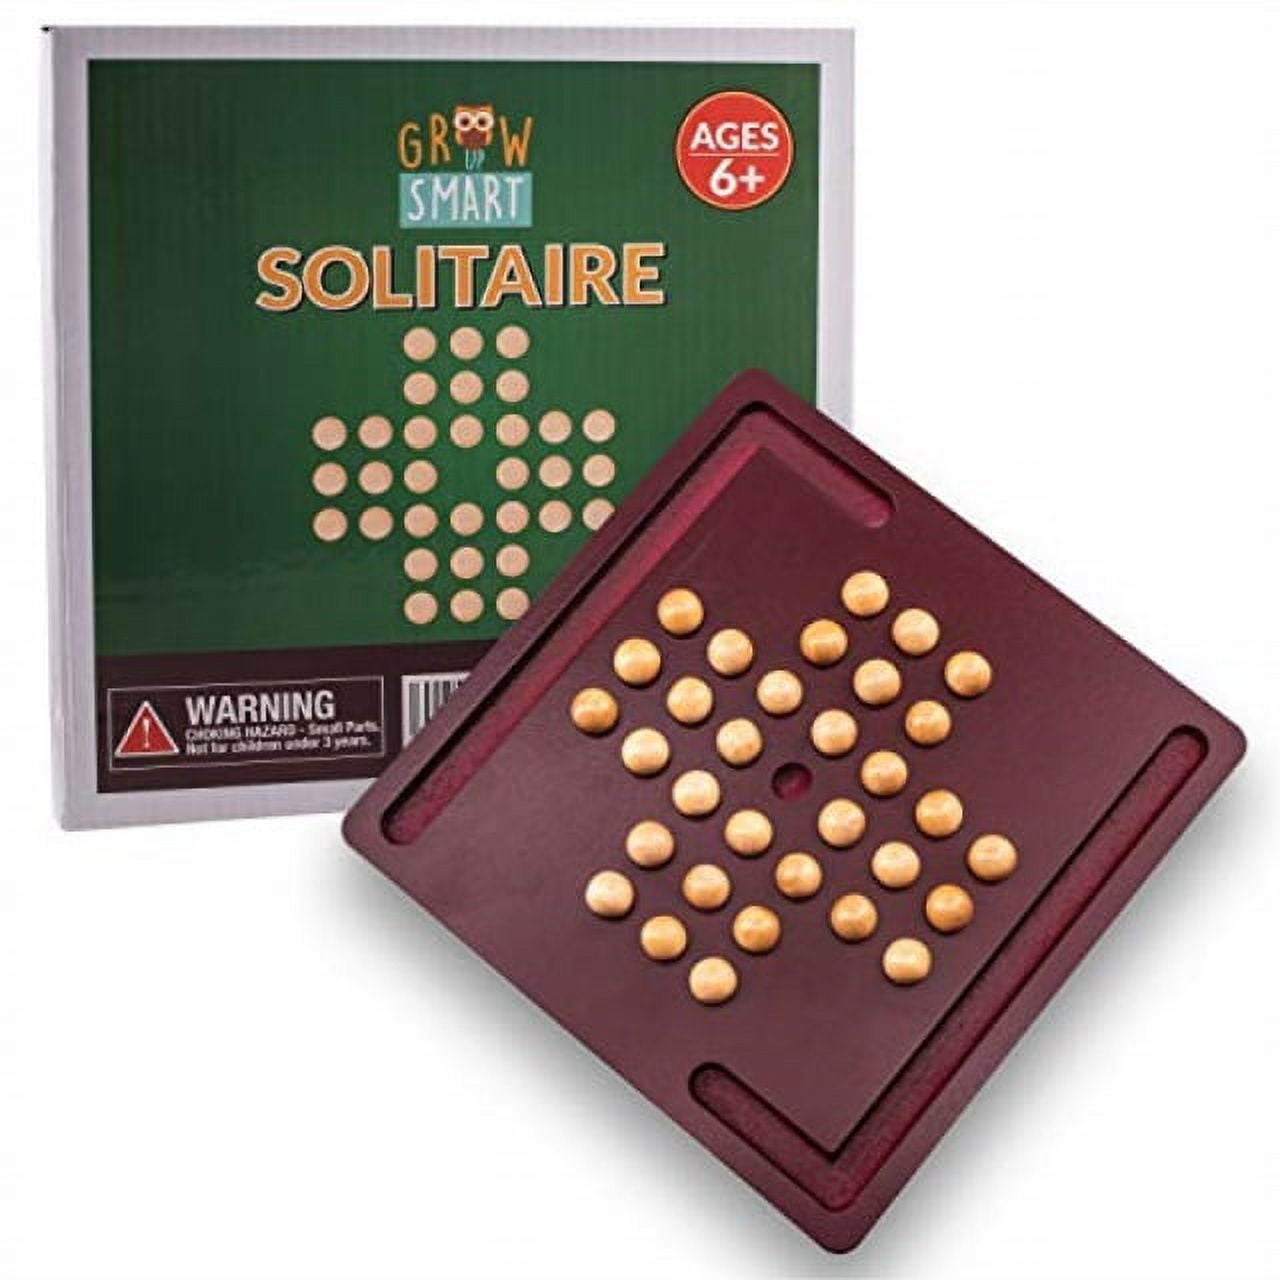 Go Play These Variety Of Games At Solitaire.org- Fun Times